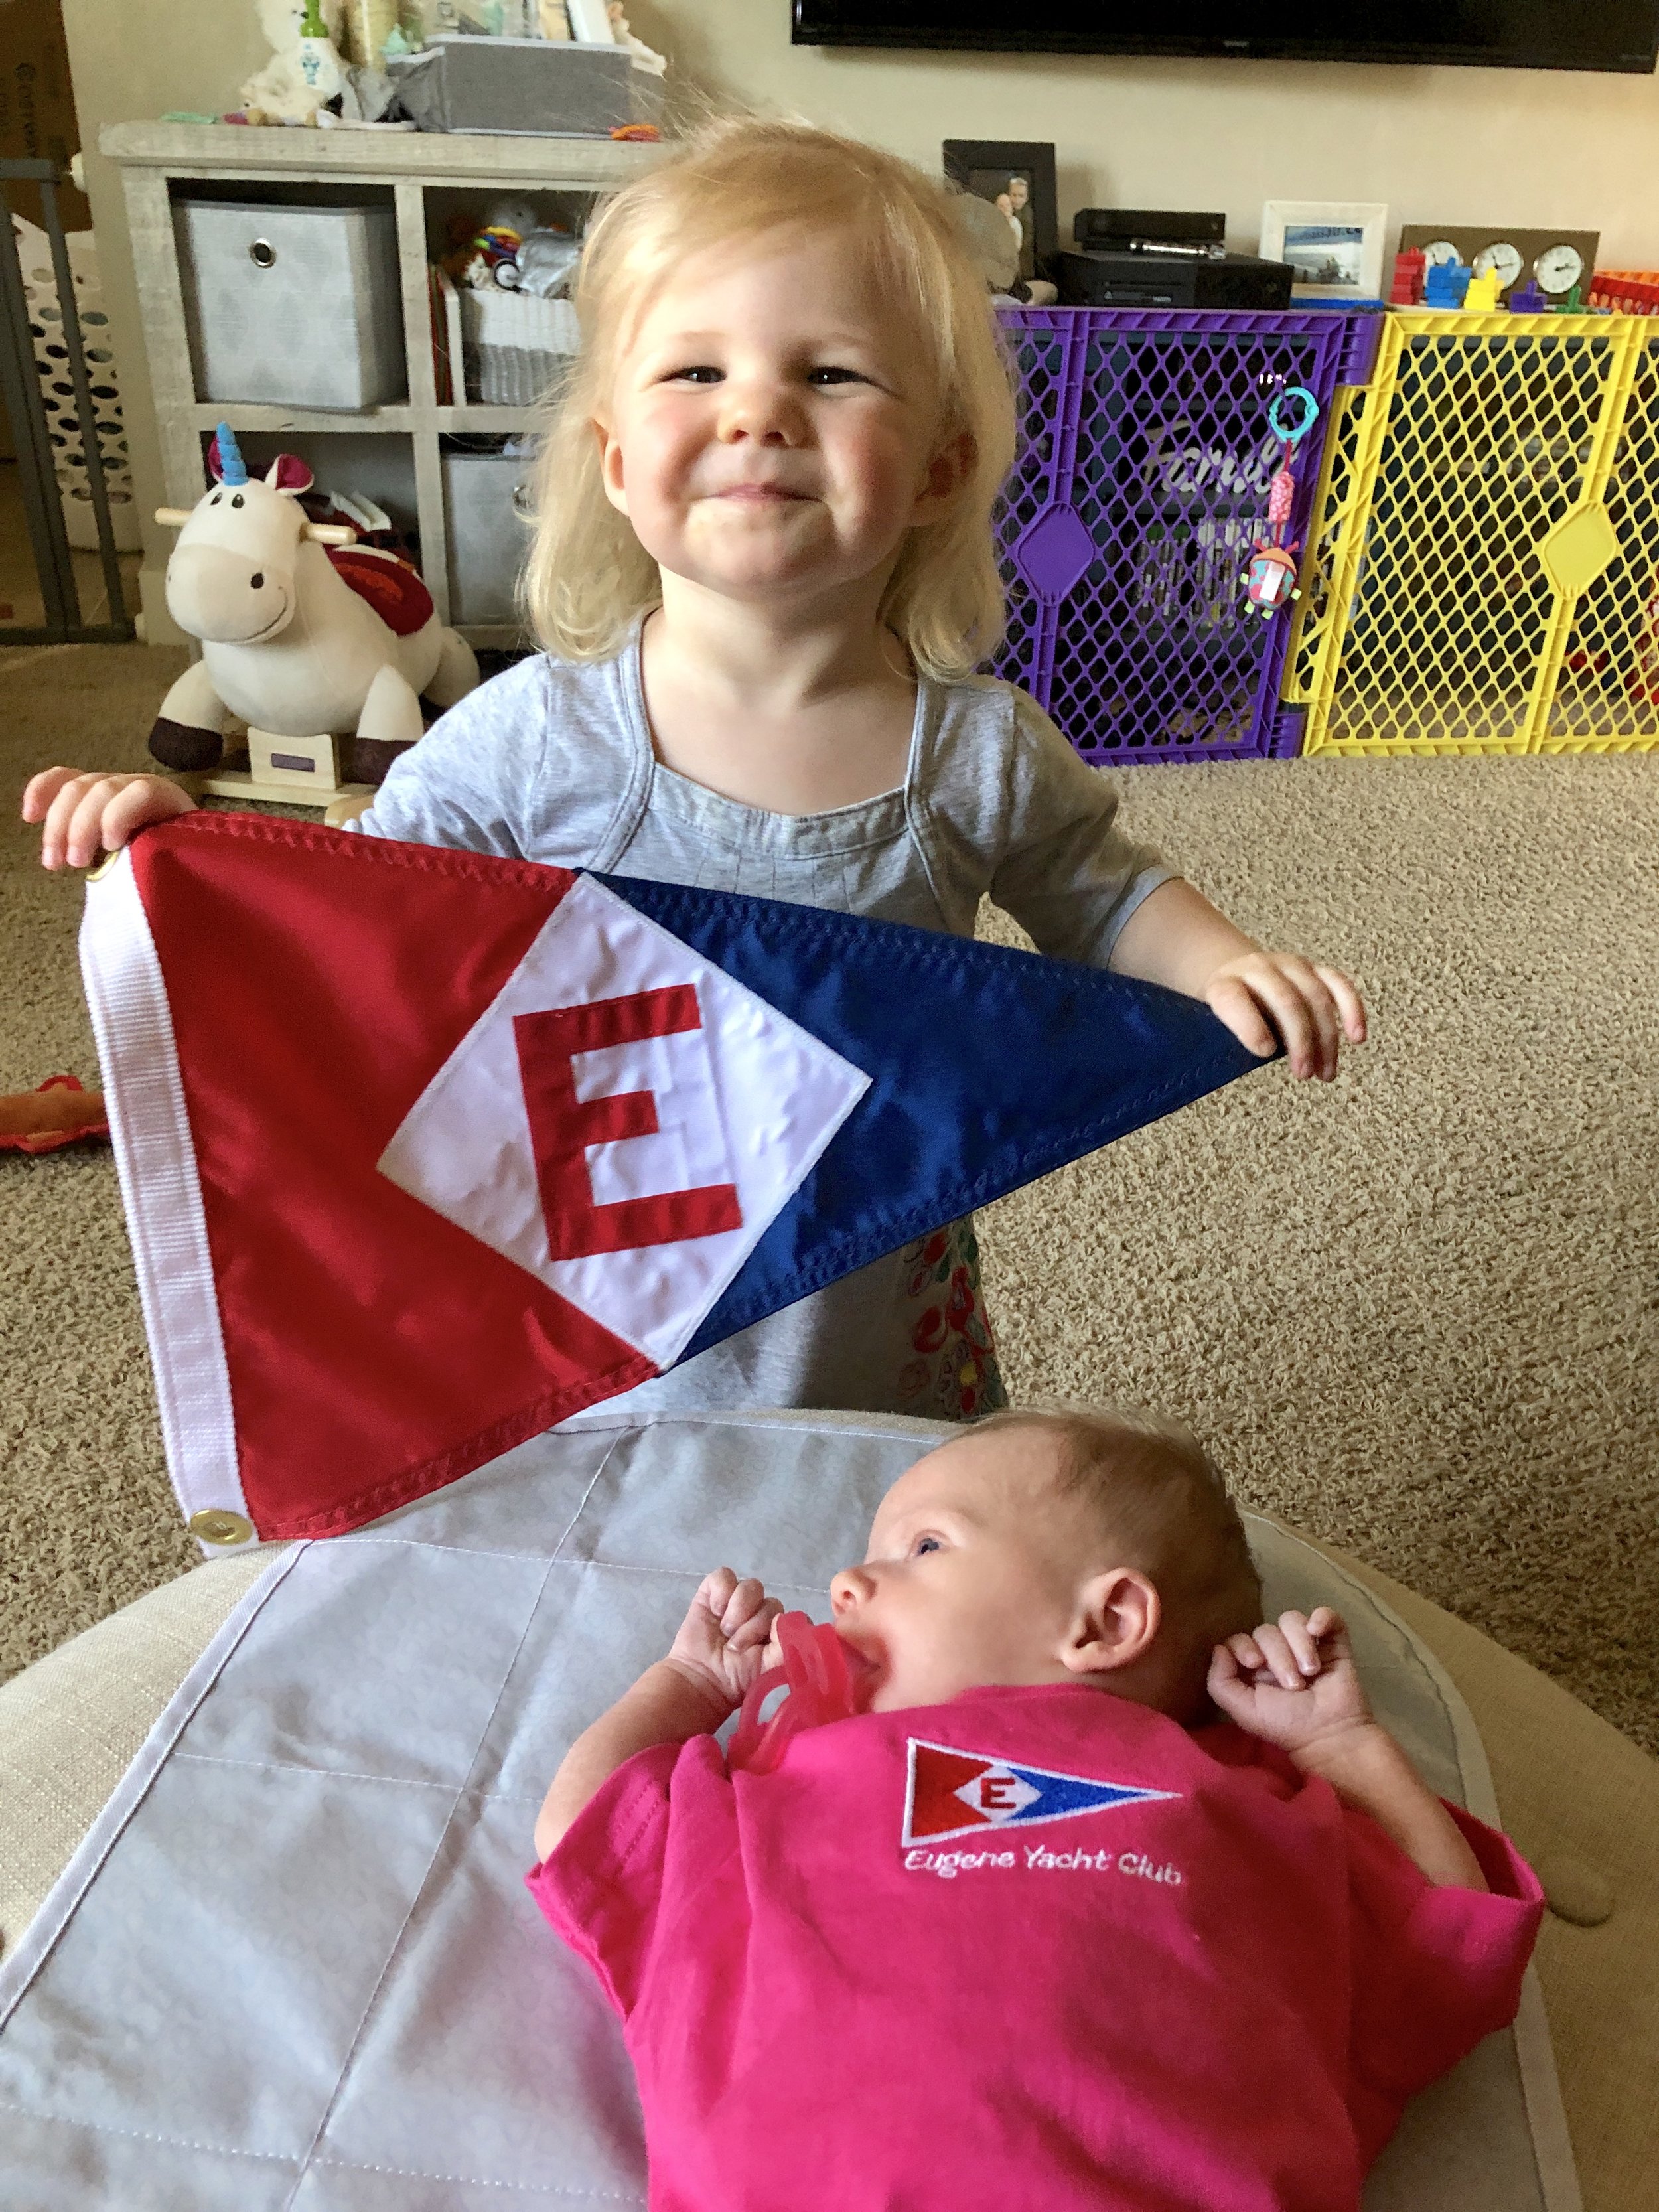  Zoey shows off her EYC burgee and her new little sister Natalie at home in Cottage Grove, Oregon. 